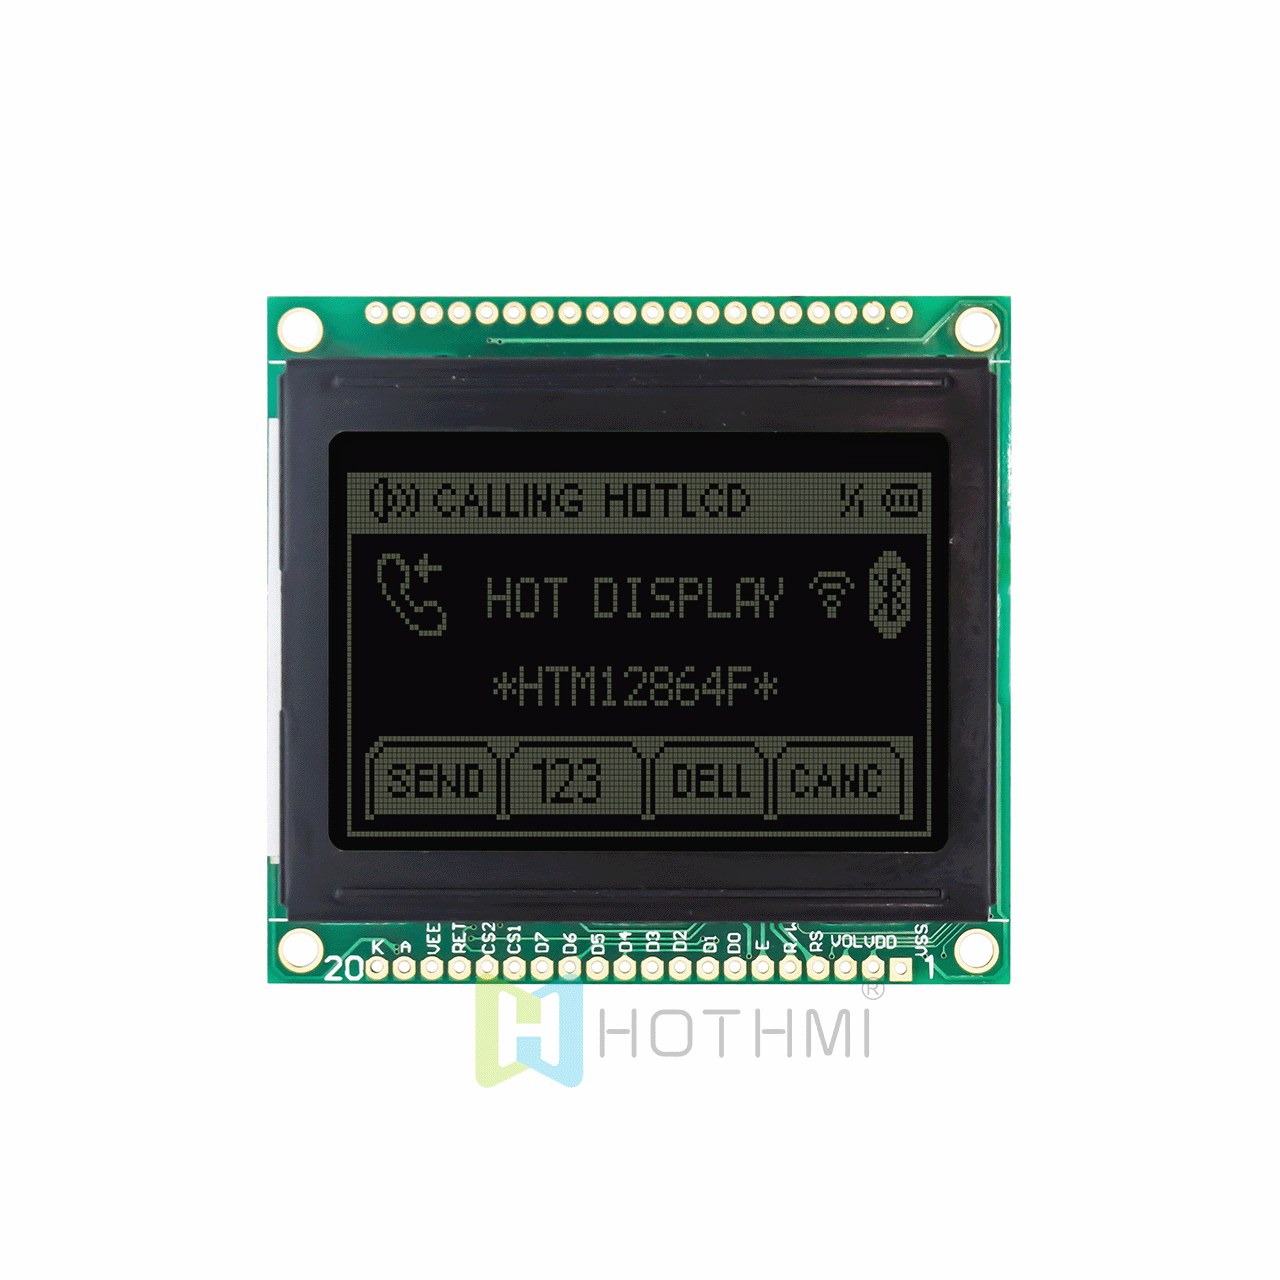 2.0-inch graphic dot matrix module/128x64 resolution/white text on black background/KS108 or AIP31108 control chip/SPI